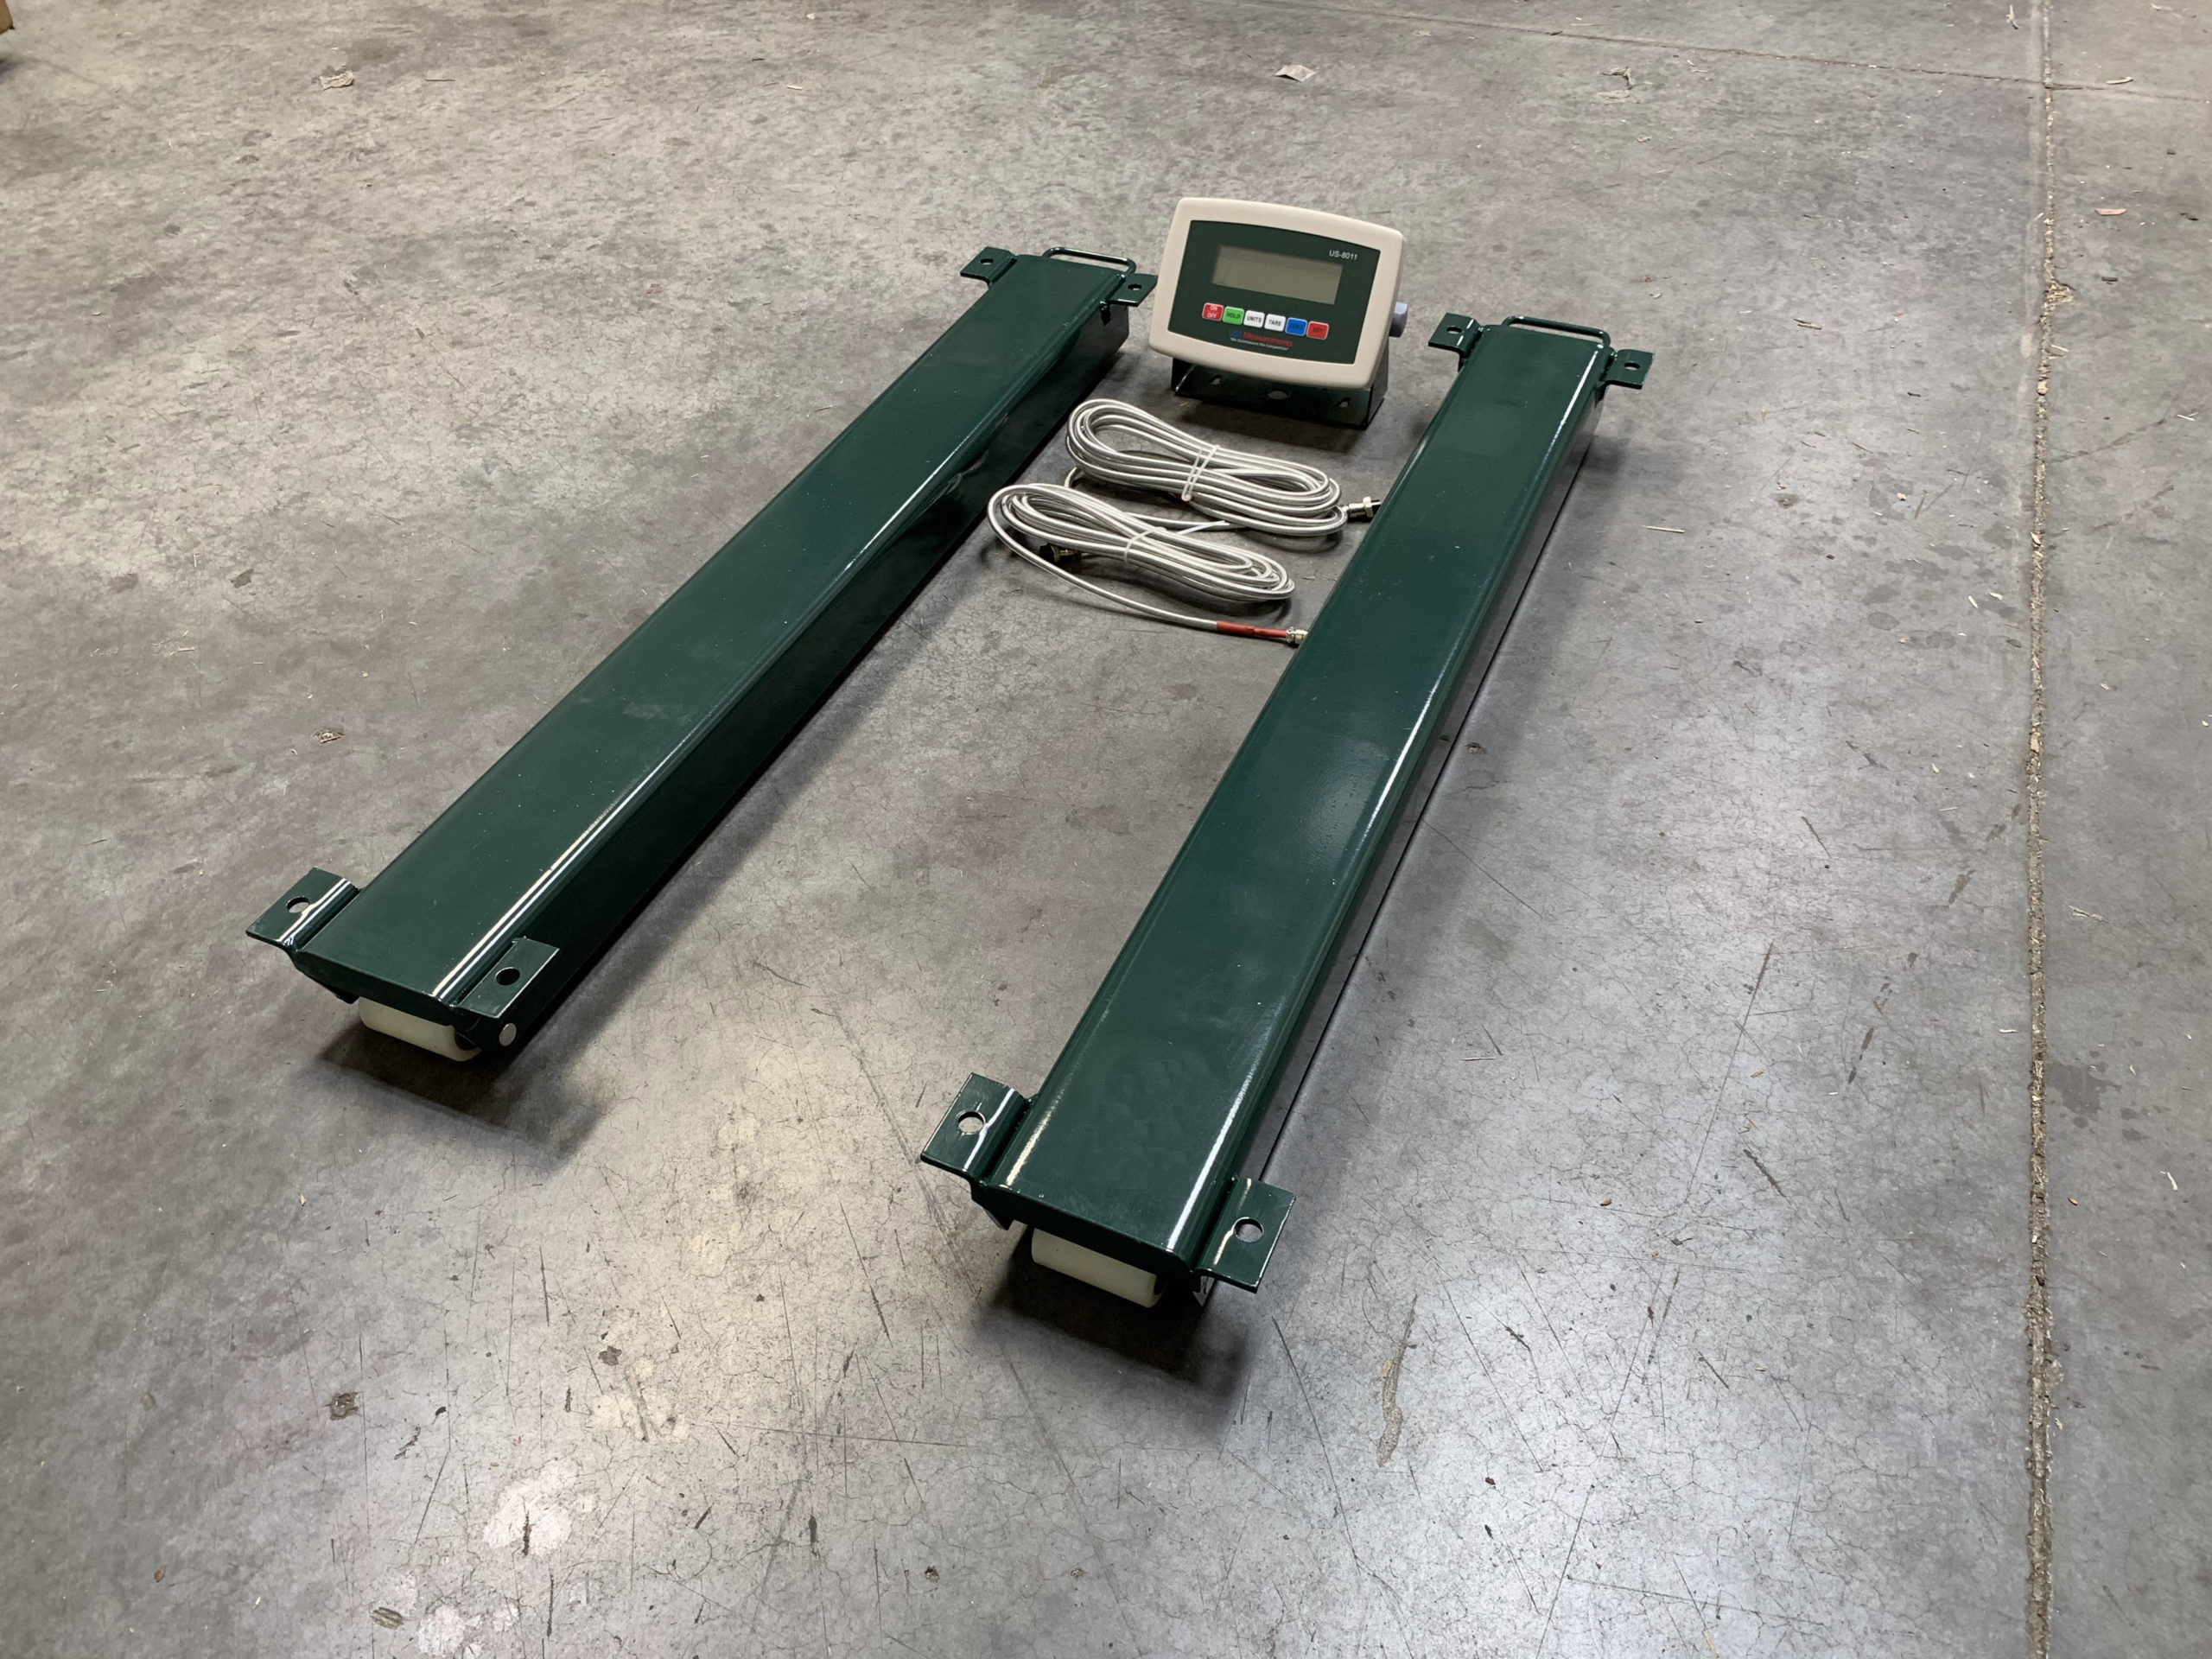 Heavy Duty Weigh Bar Scales 40 Long 10,000 lb - Prime USA Scales